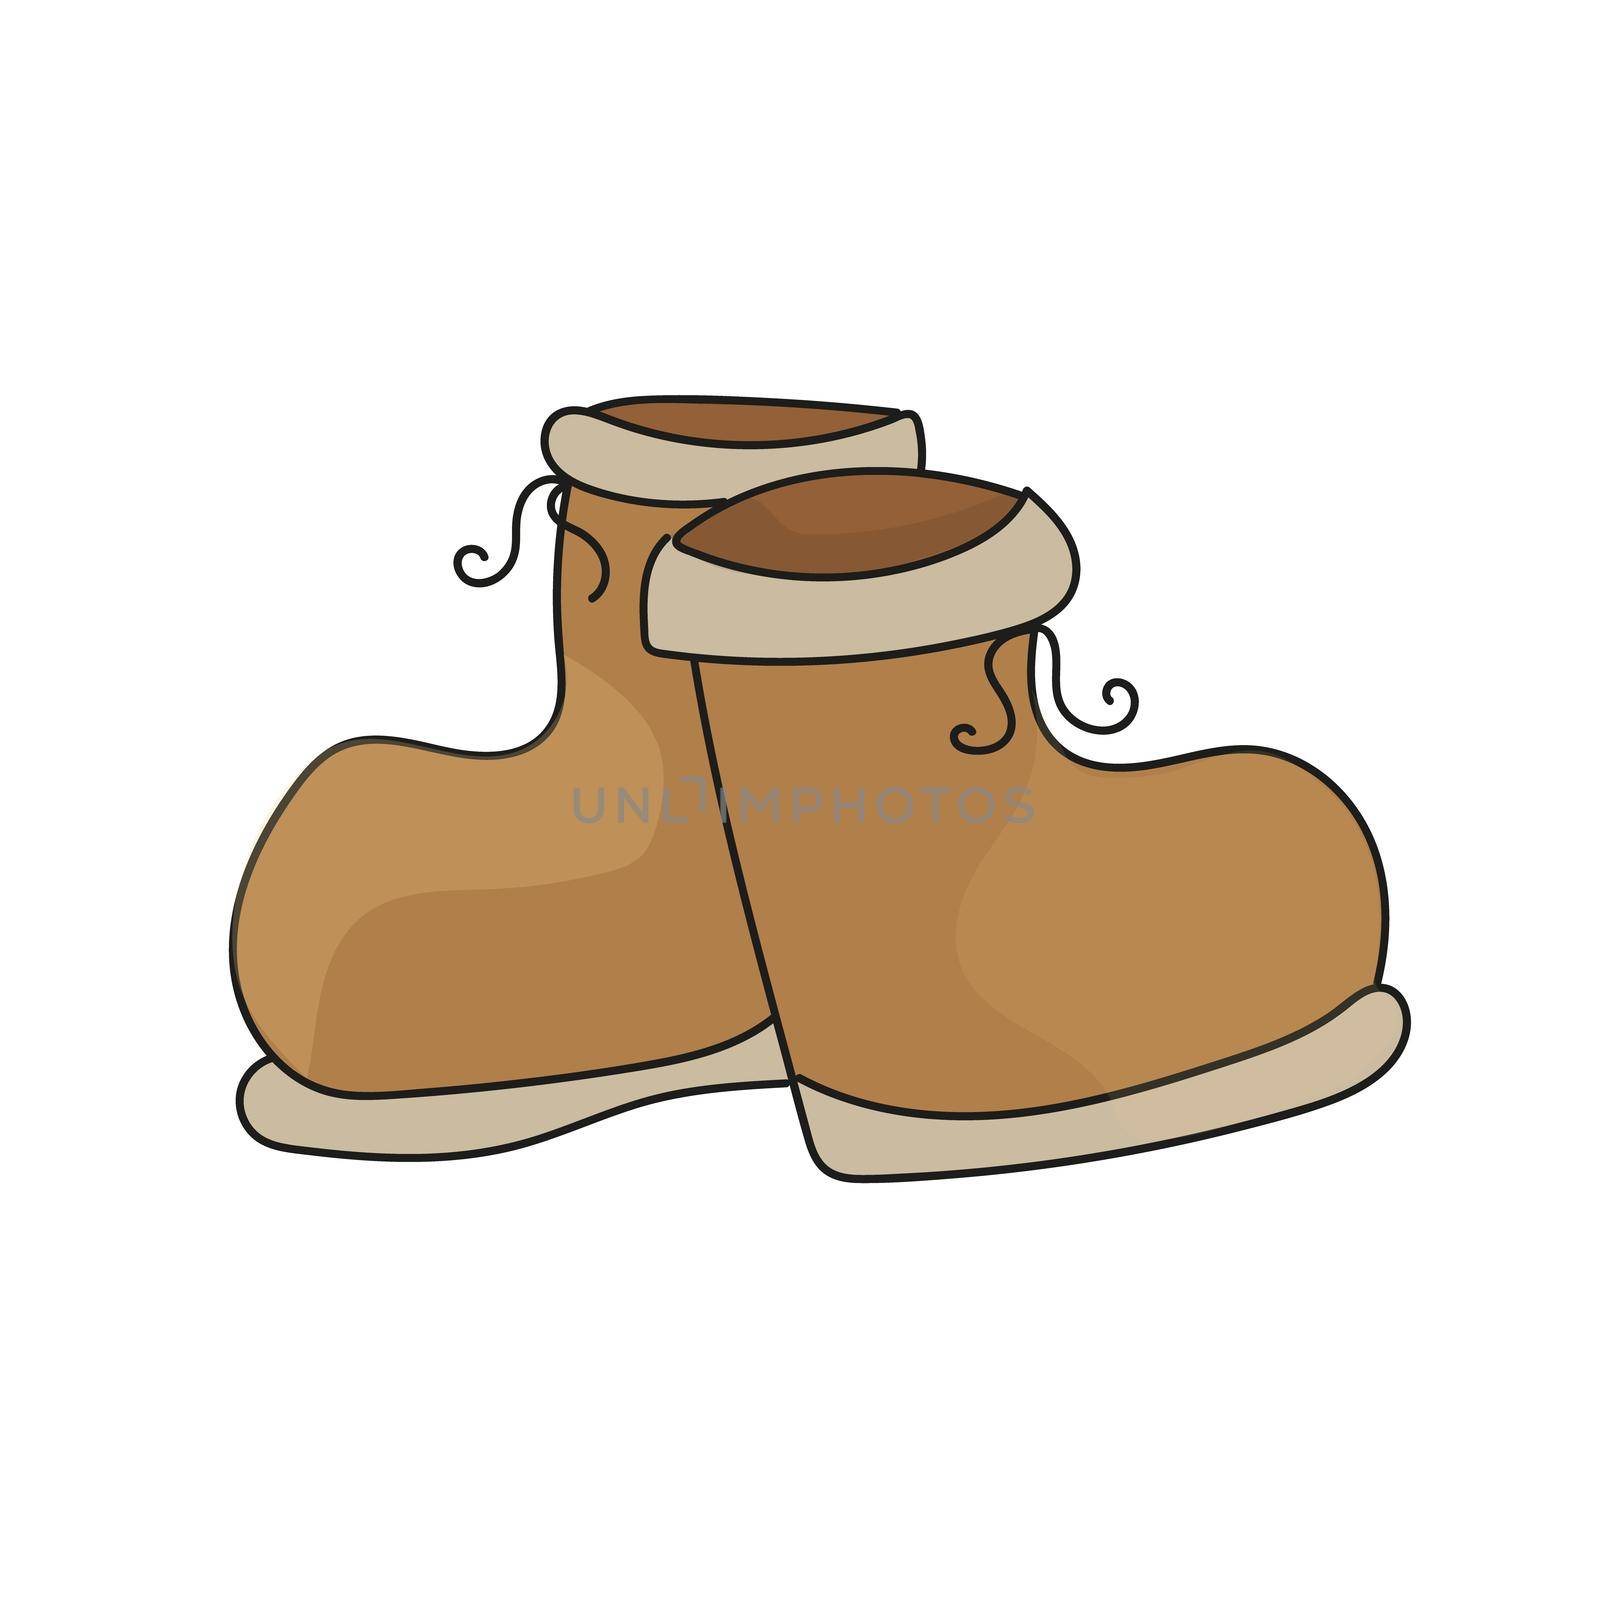 Pair of brown boots - simple cartoon illustration isolated on white.